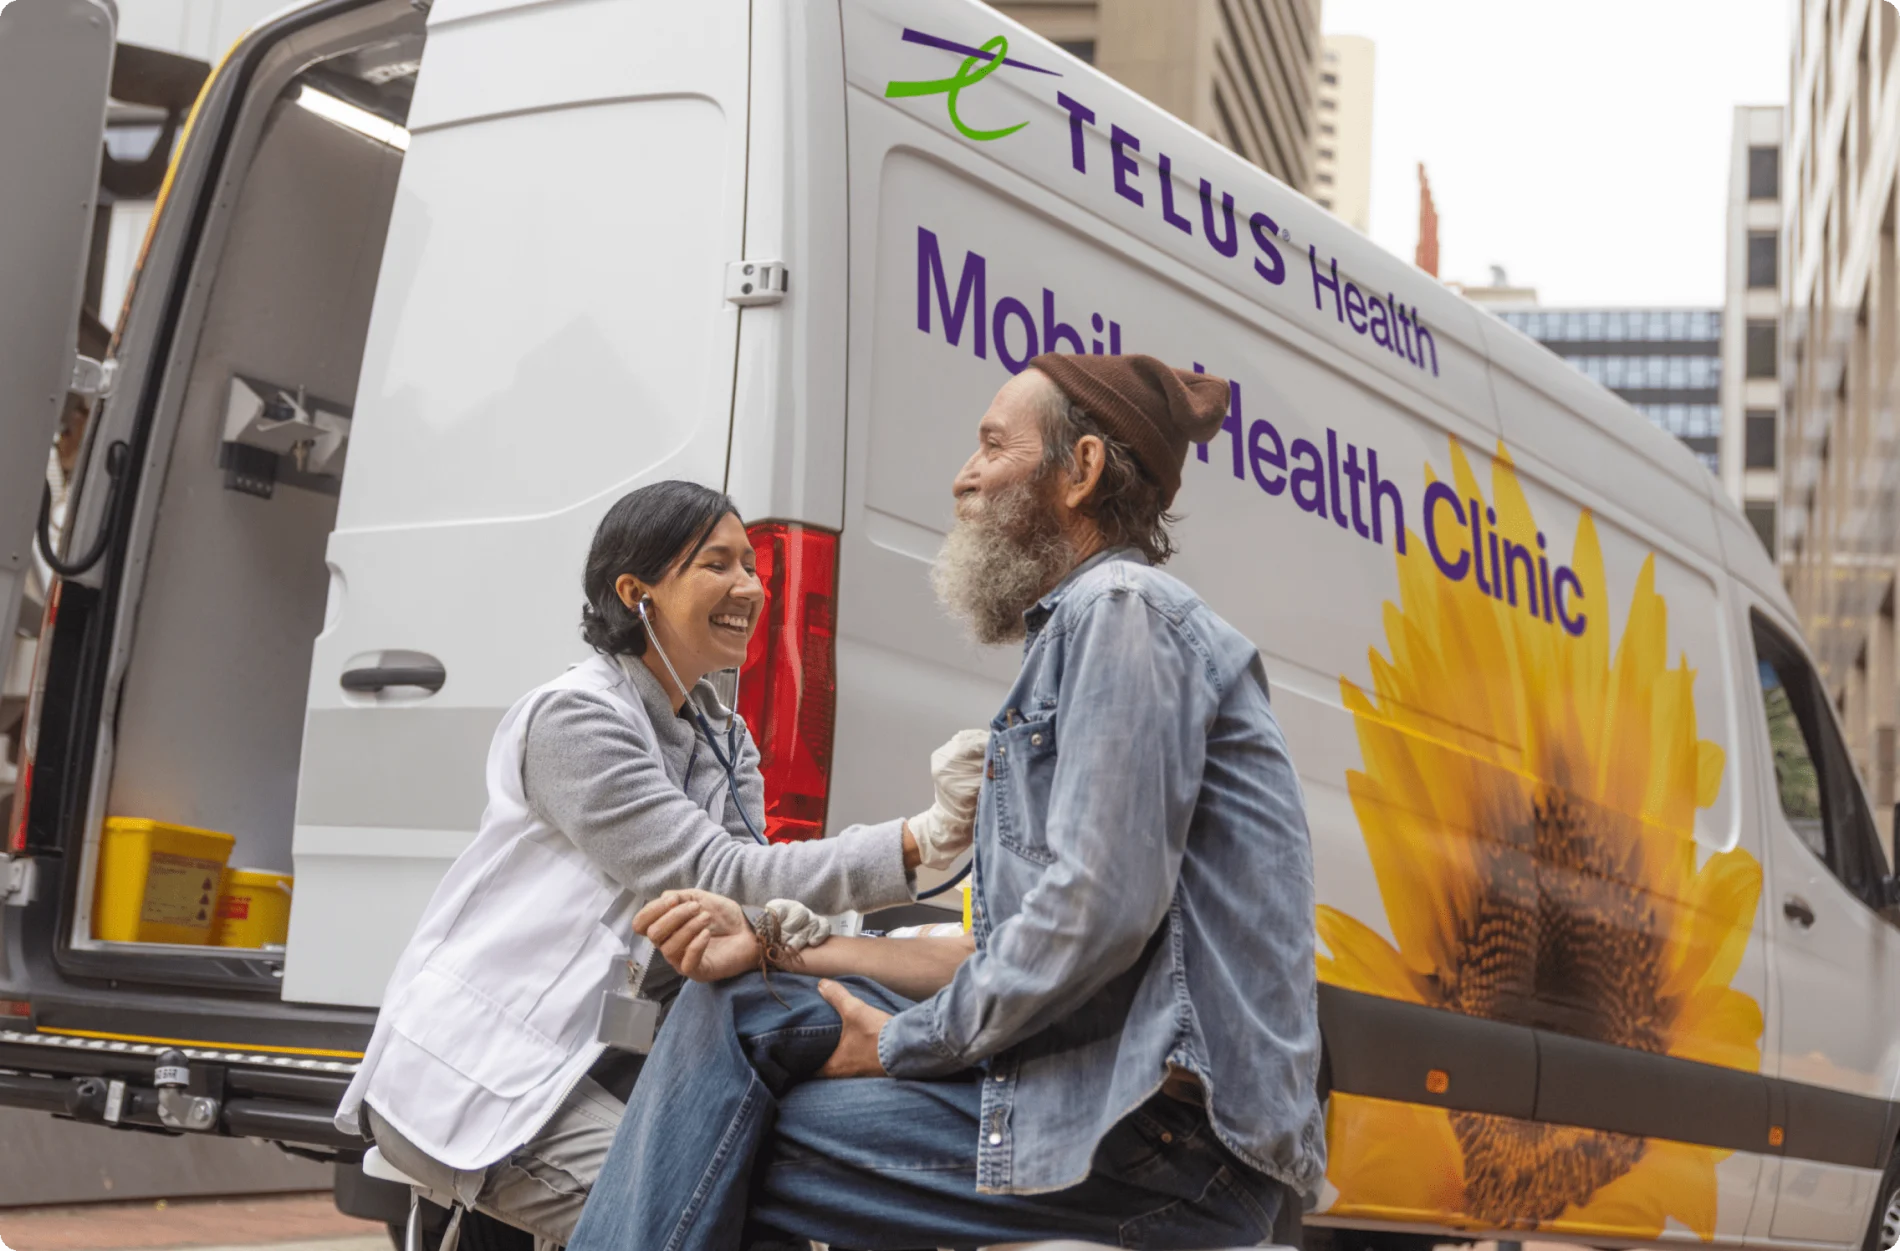 A TELUS Mobile Health Clinic team member attending to a patient.